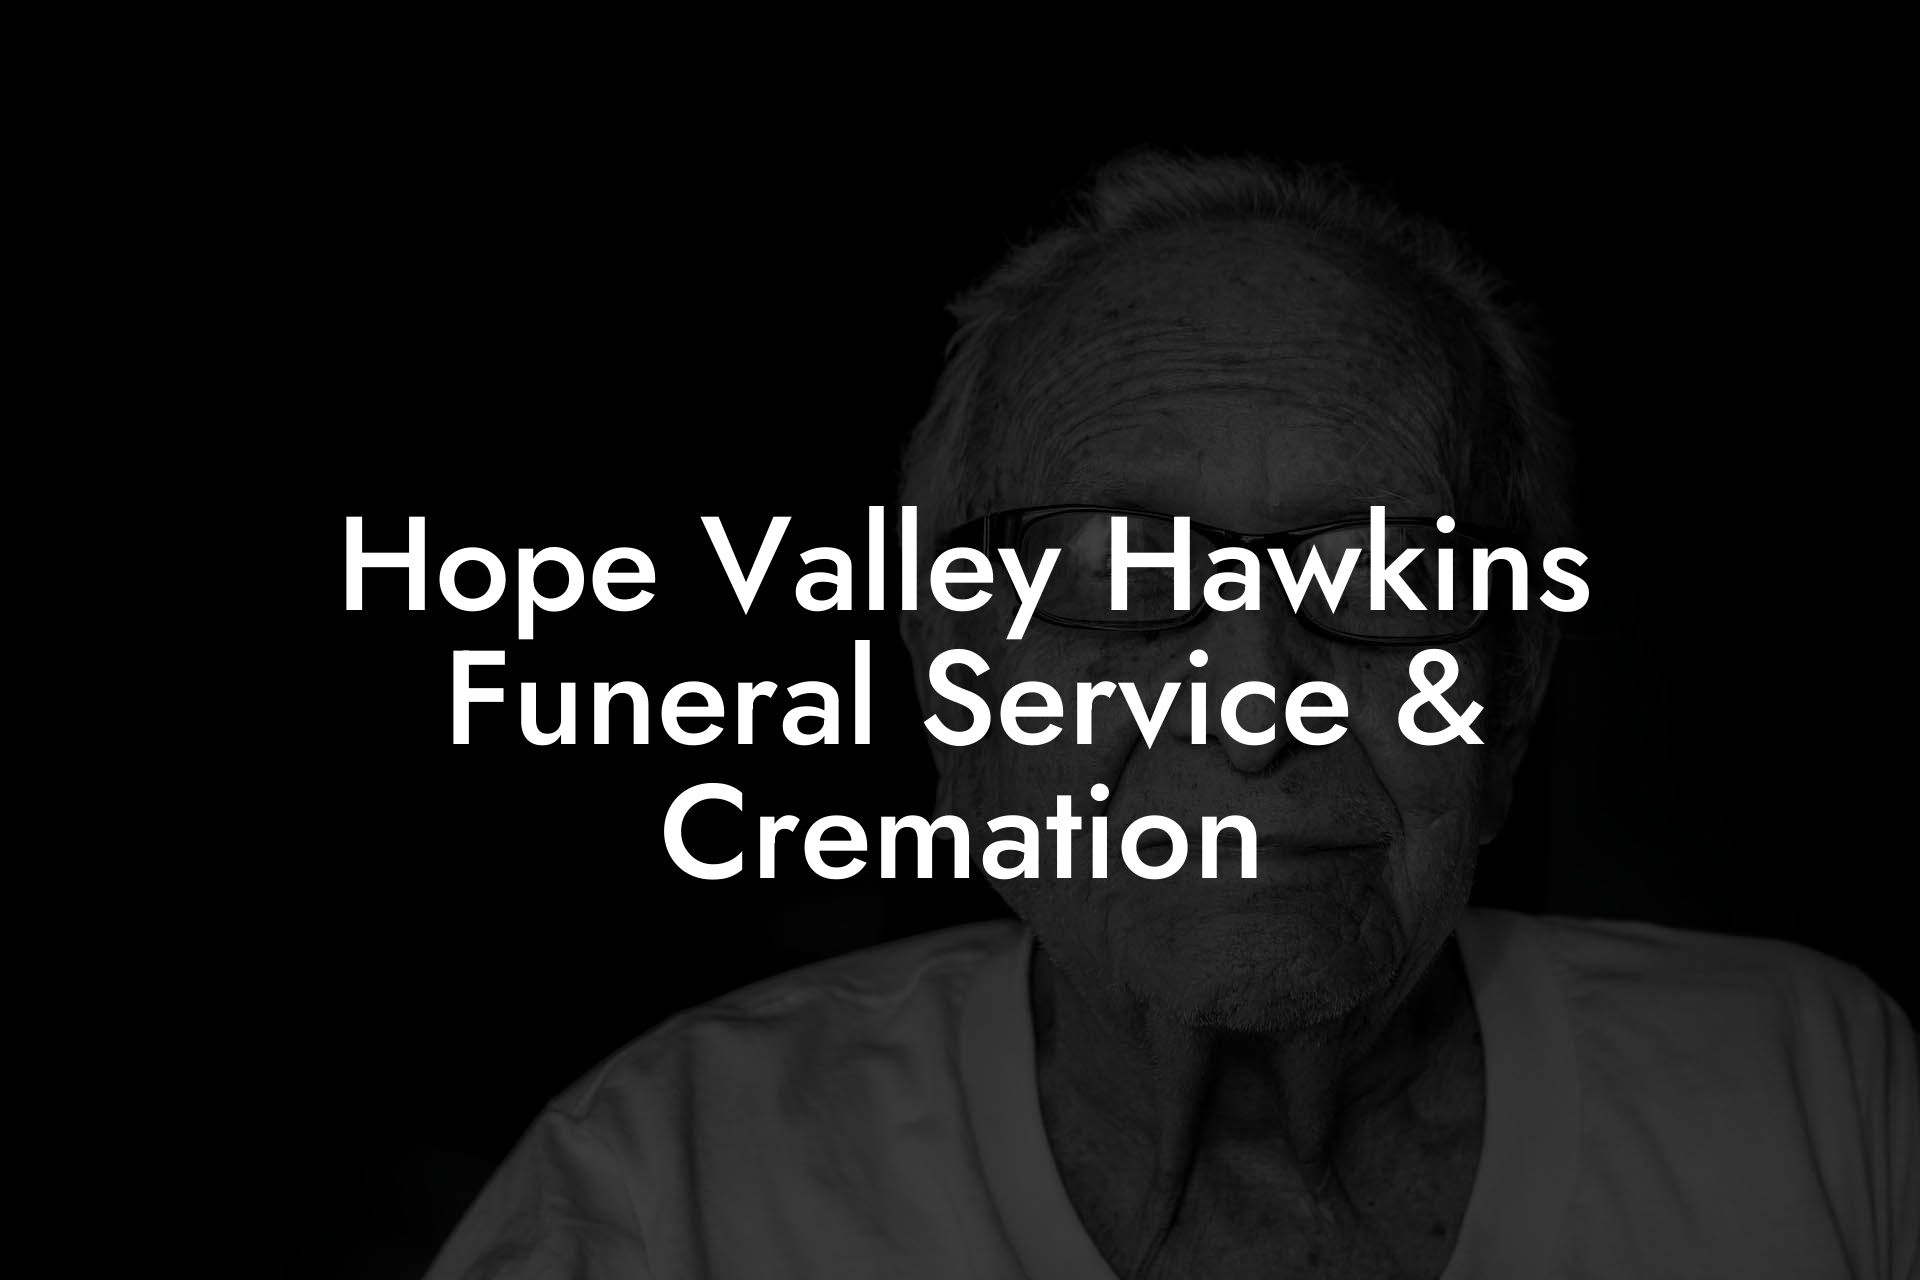 Hope Valley Hawkins Funeral Service & Cremation